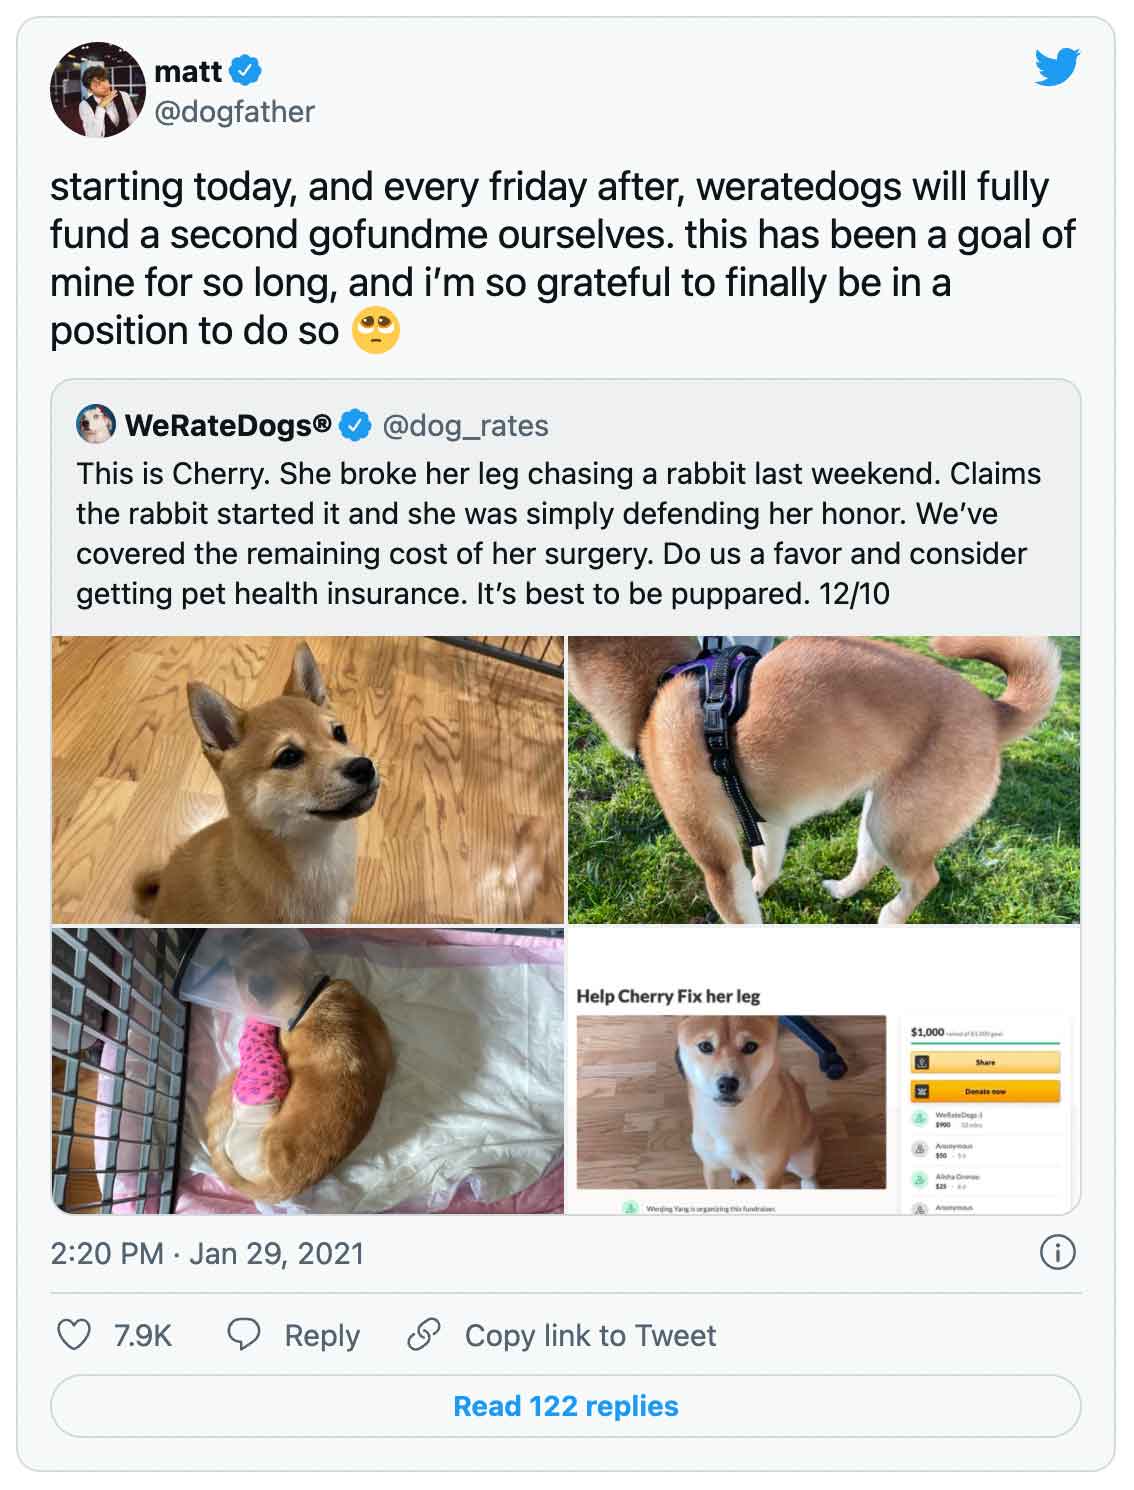 Matt @dogfather's tweet: starting today, and every friday after, weratedogs will fully fund a second gofundme ourselves. this has been a goal of mine for so long, and i’m so grateful to finally be in a position to do so 🥺 | We Rate Dogs' retweet: This is Cherry. She broke her leg chasing a rabbit last weekend. Claims the rabbit started it and she was simply defending her honor. We’ve covered the remaining cost of her surgery. Do us a favor and consider getting pet health insurance. It’s best to be puppared. 12/10